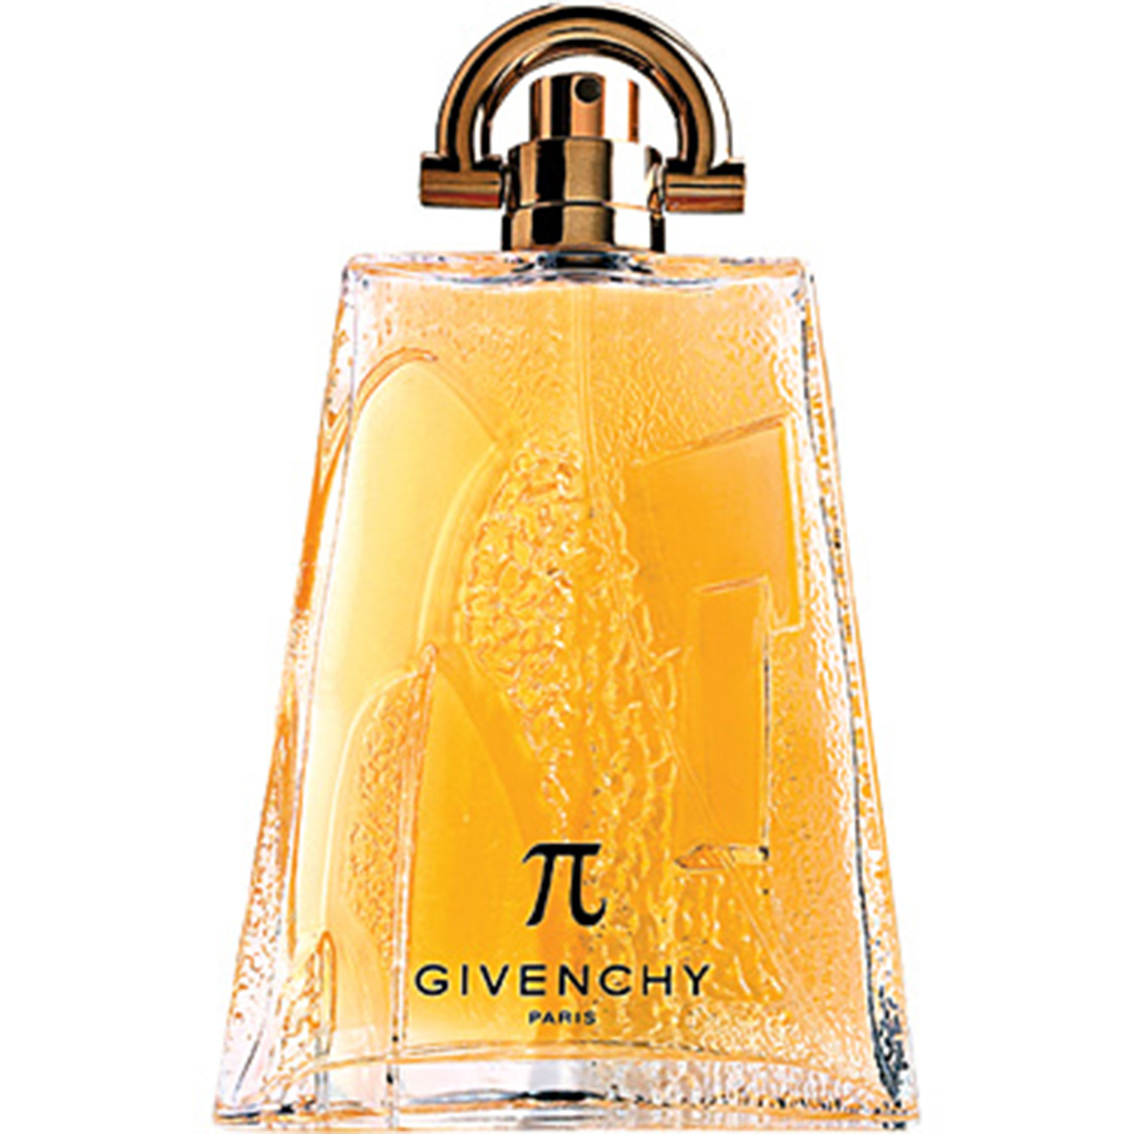 givenchy pi neo aftershave